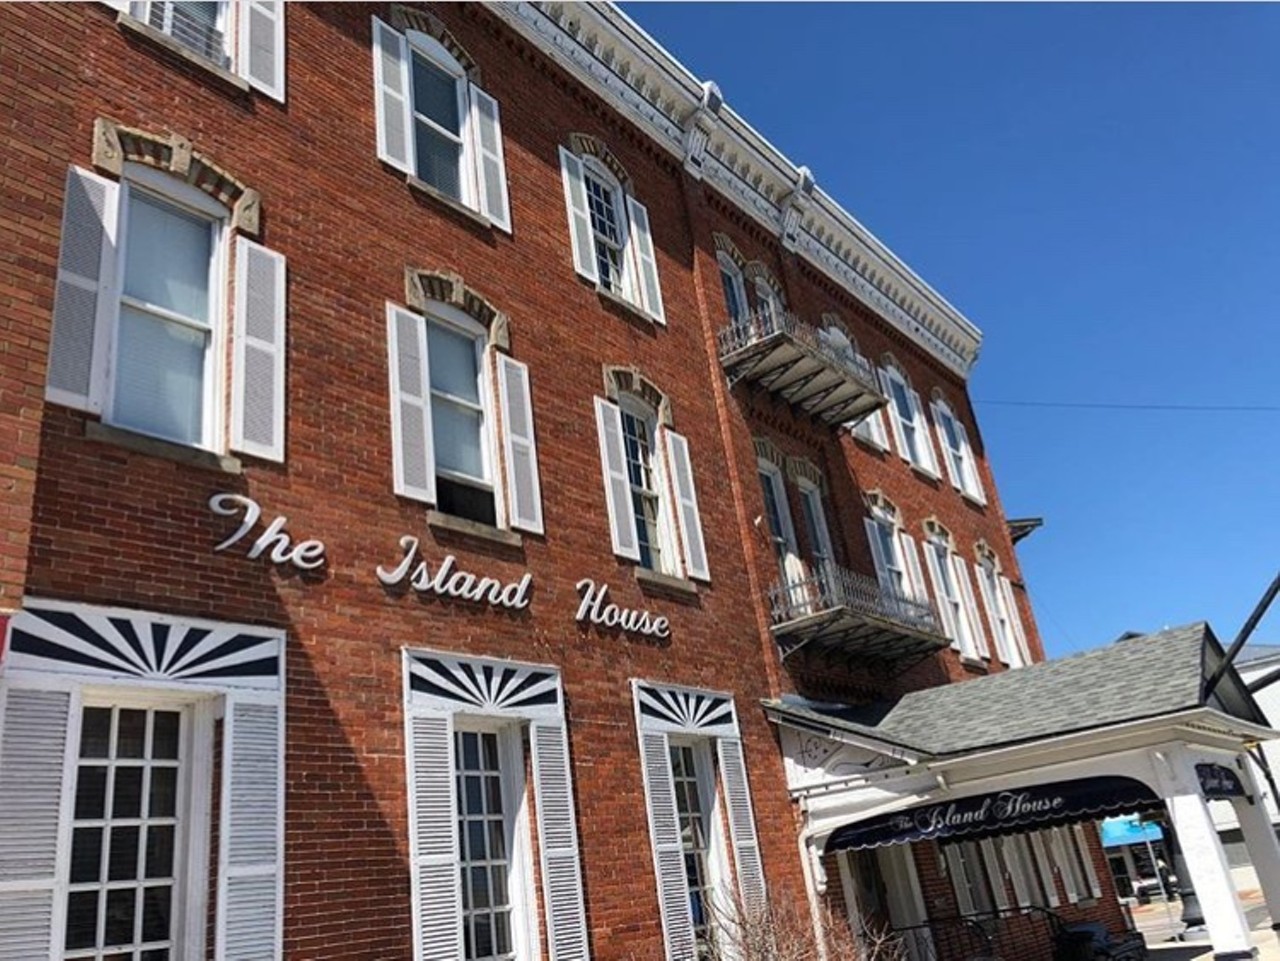 Island House Hotel 
102 N Madison St., Port Clinton
One of the most historic hotels in the state, Island House Hotel is located right by the shores of Lake Erie, and is not that far from Ohio favorites, such as Cedar Point and Put N&#146; Bay. For those who are planning to stay for a longer duration, the hotel offers various extended stay suites with full size kitchens. 
Photo via Patrickshepherd/Instagram